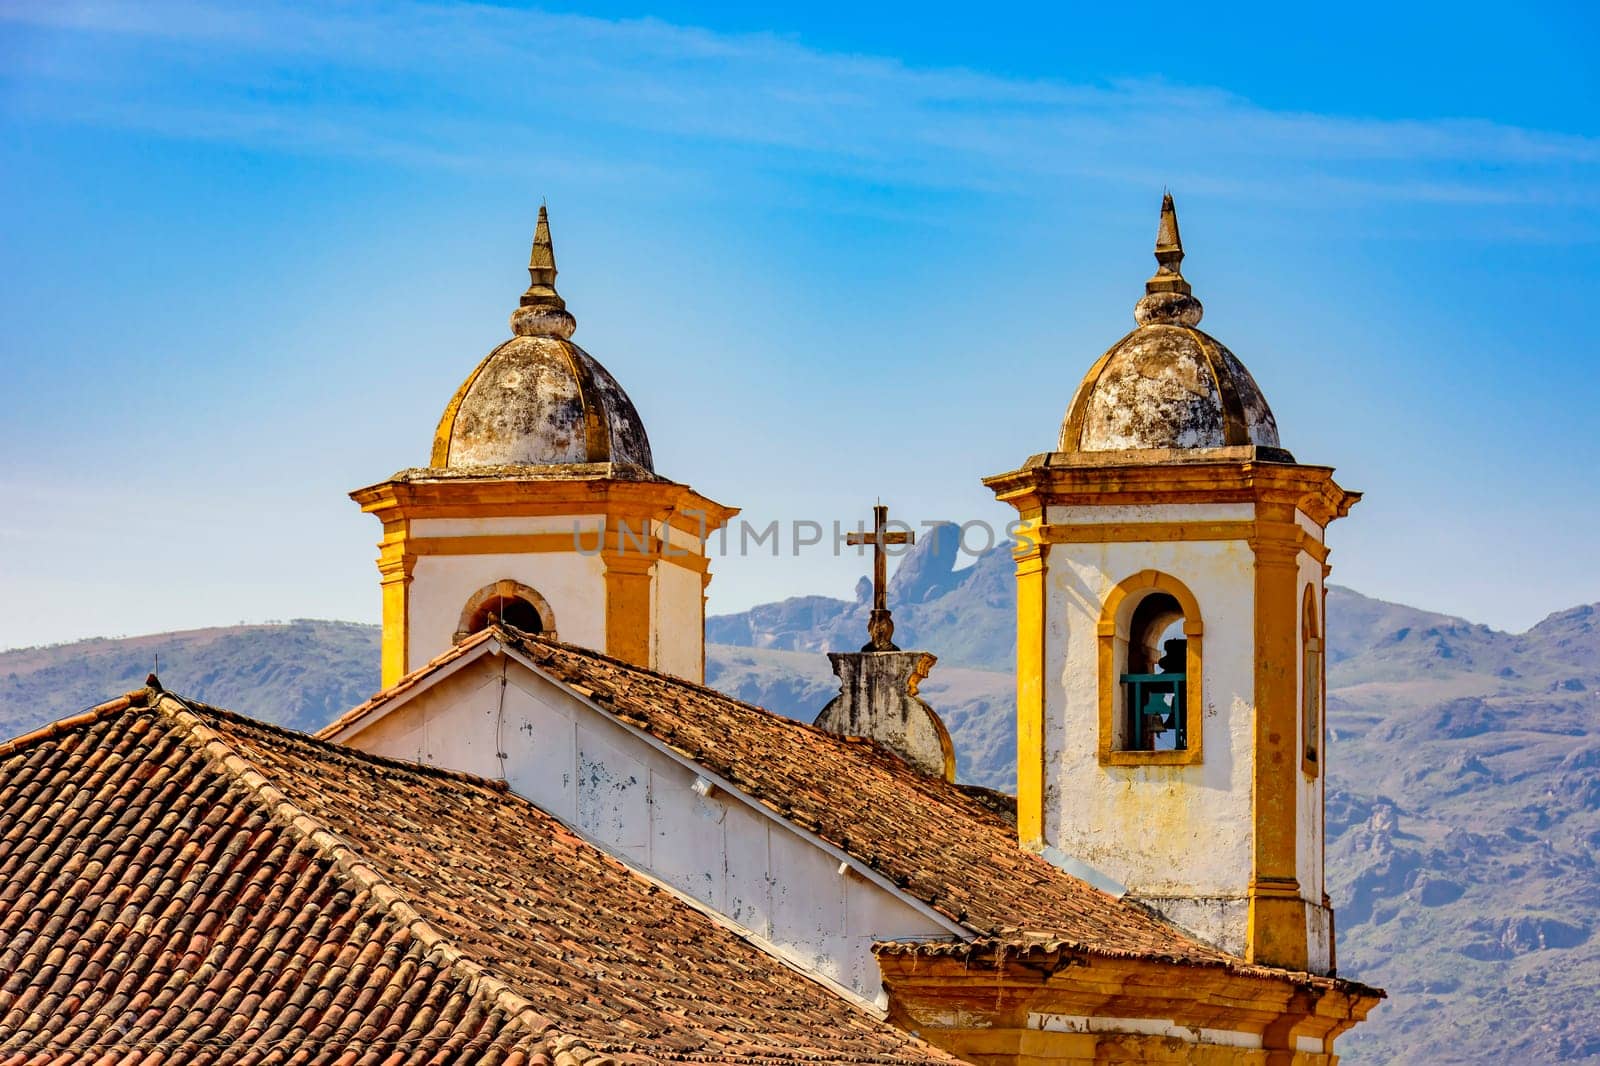 Back view of old and historic church in colonial architecture from the 18th century in the city of Ouro Preto in Minas Gerais, Brazil  with mountains and hills behind